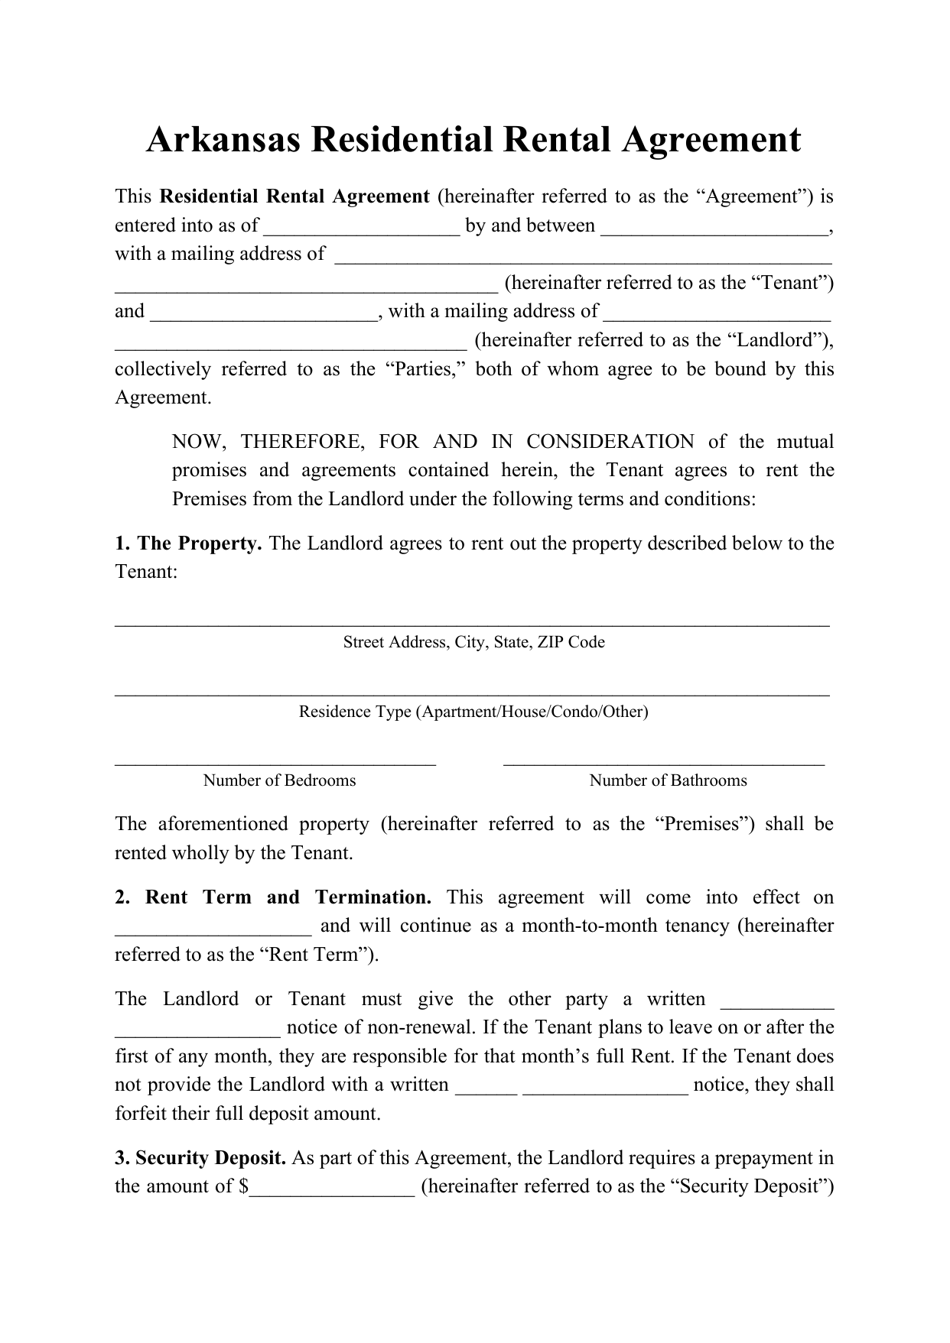 Residential Rental Agreement Template - Arkansas, Page 1